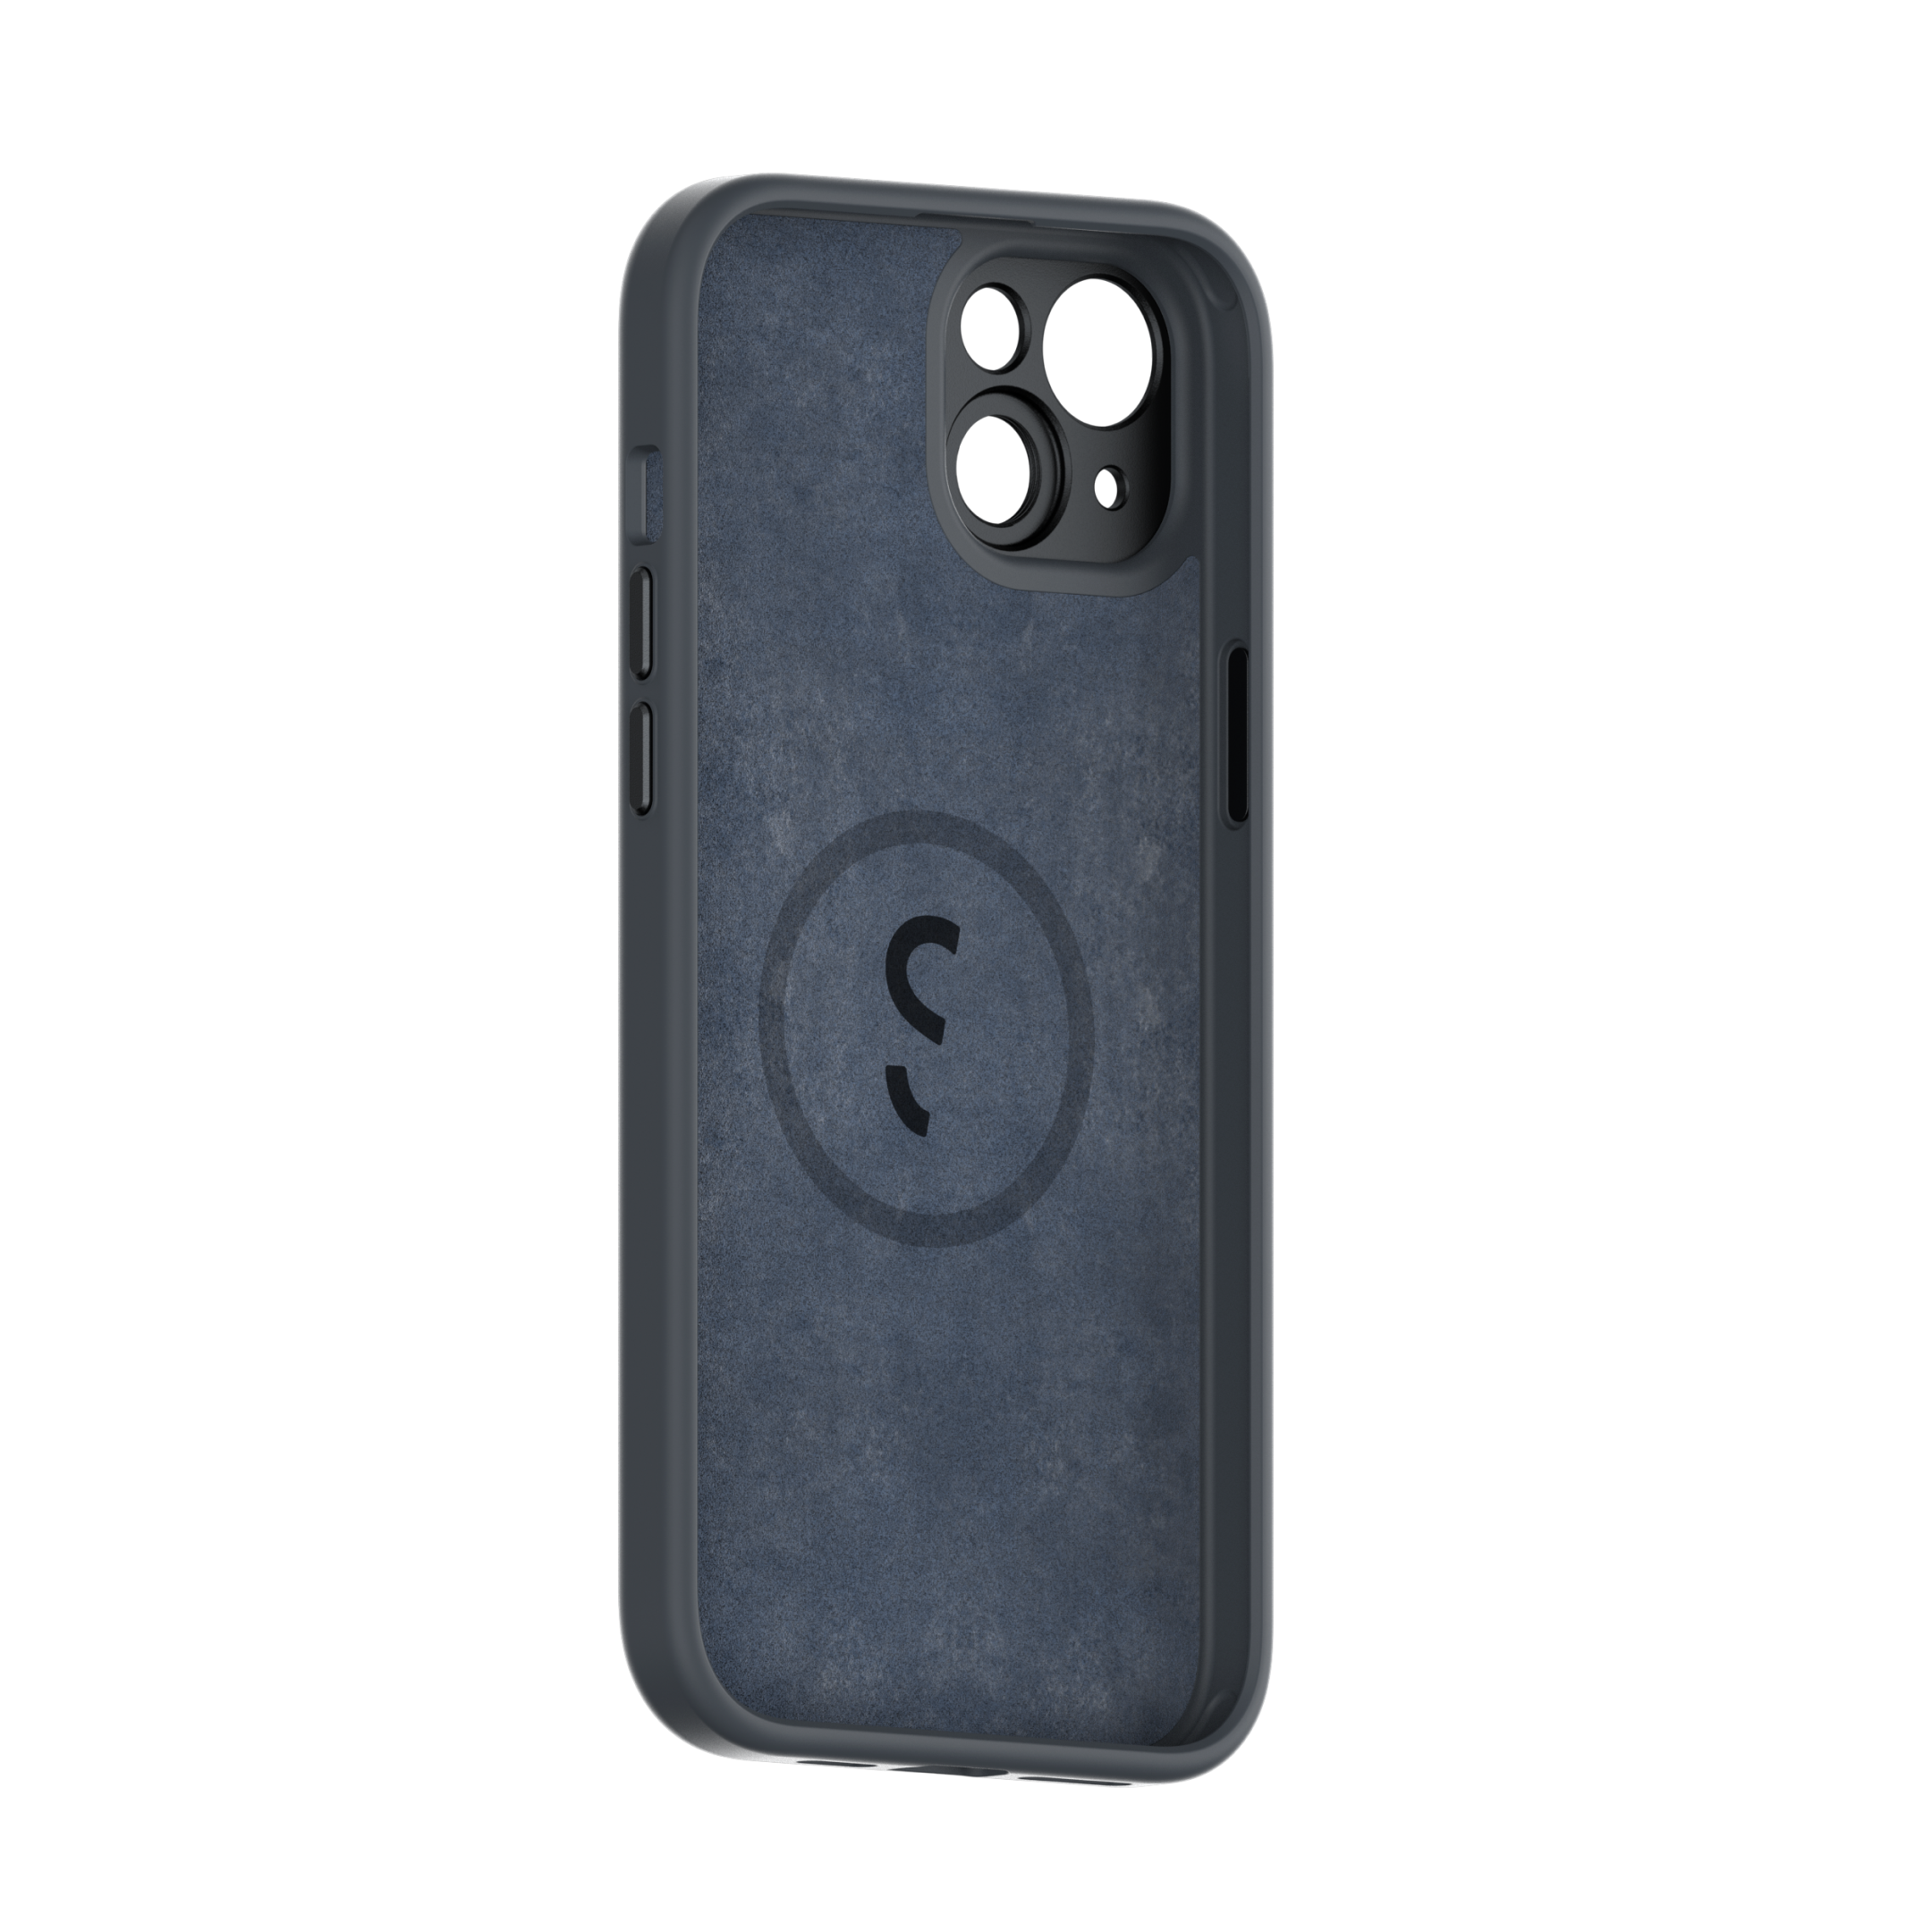 mit Plus, iPhone Objektivhalterung, Charcoal Case 15 SHIFTCAM Apple, LensUltra Backcover,